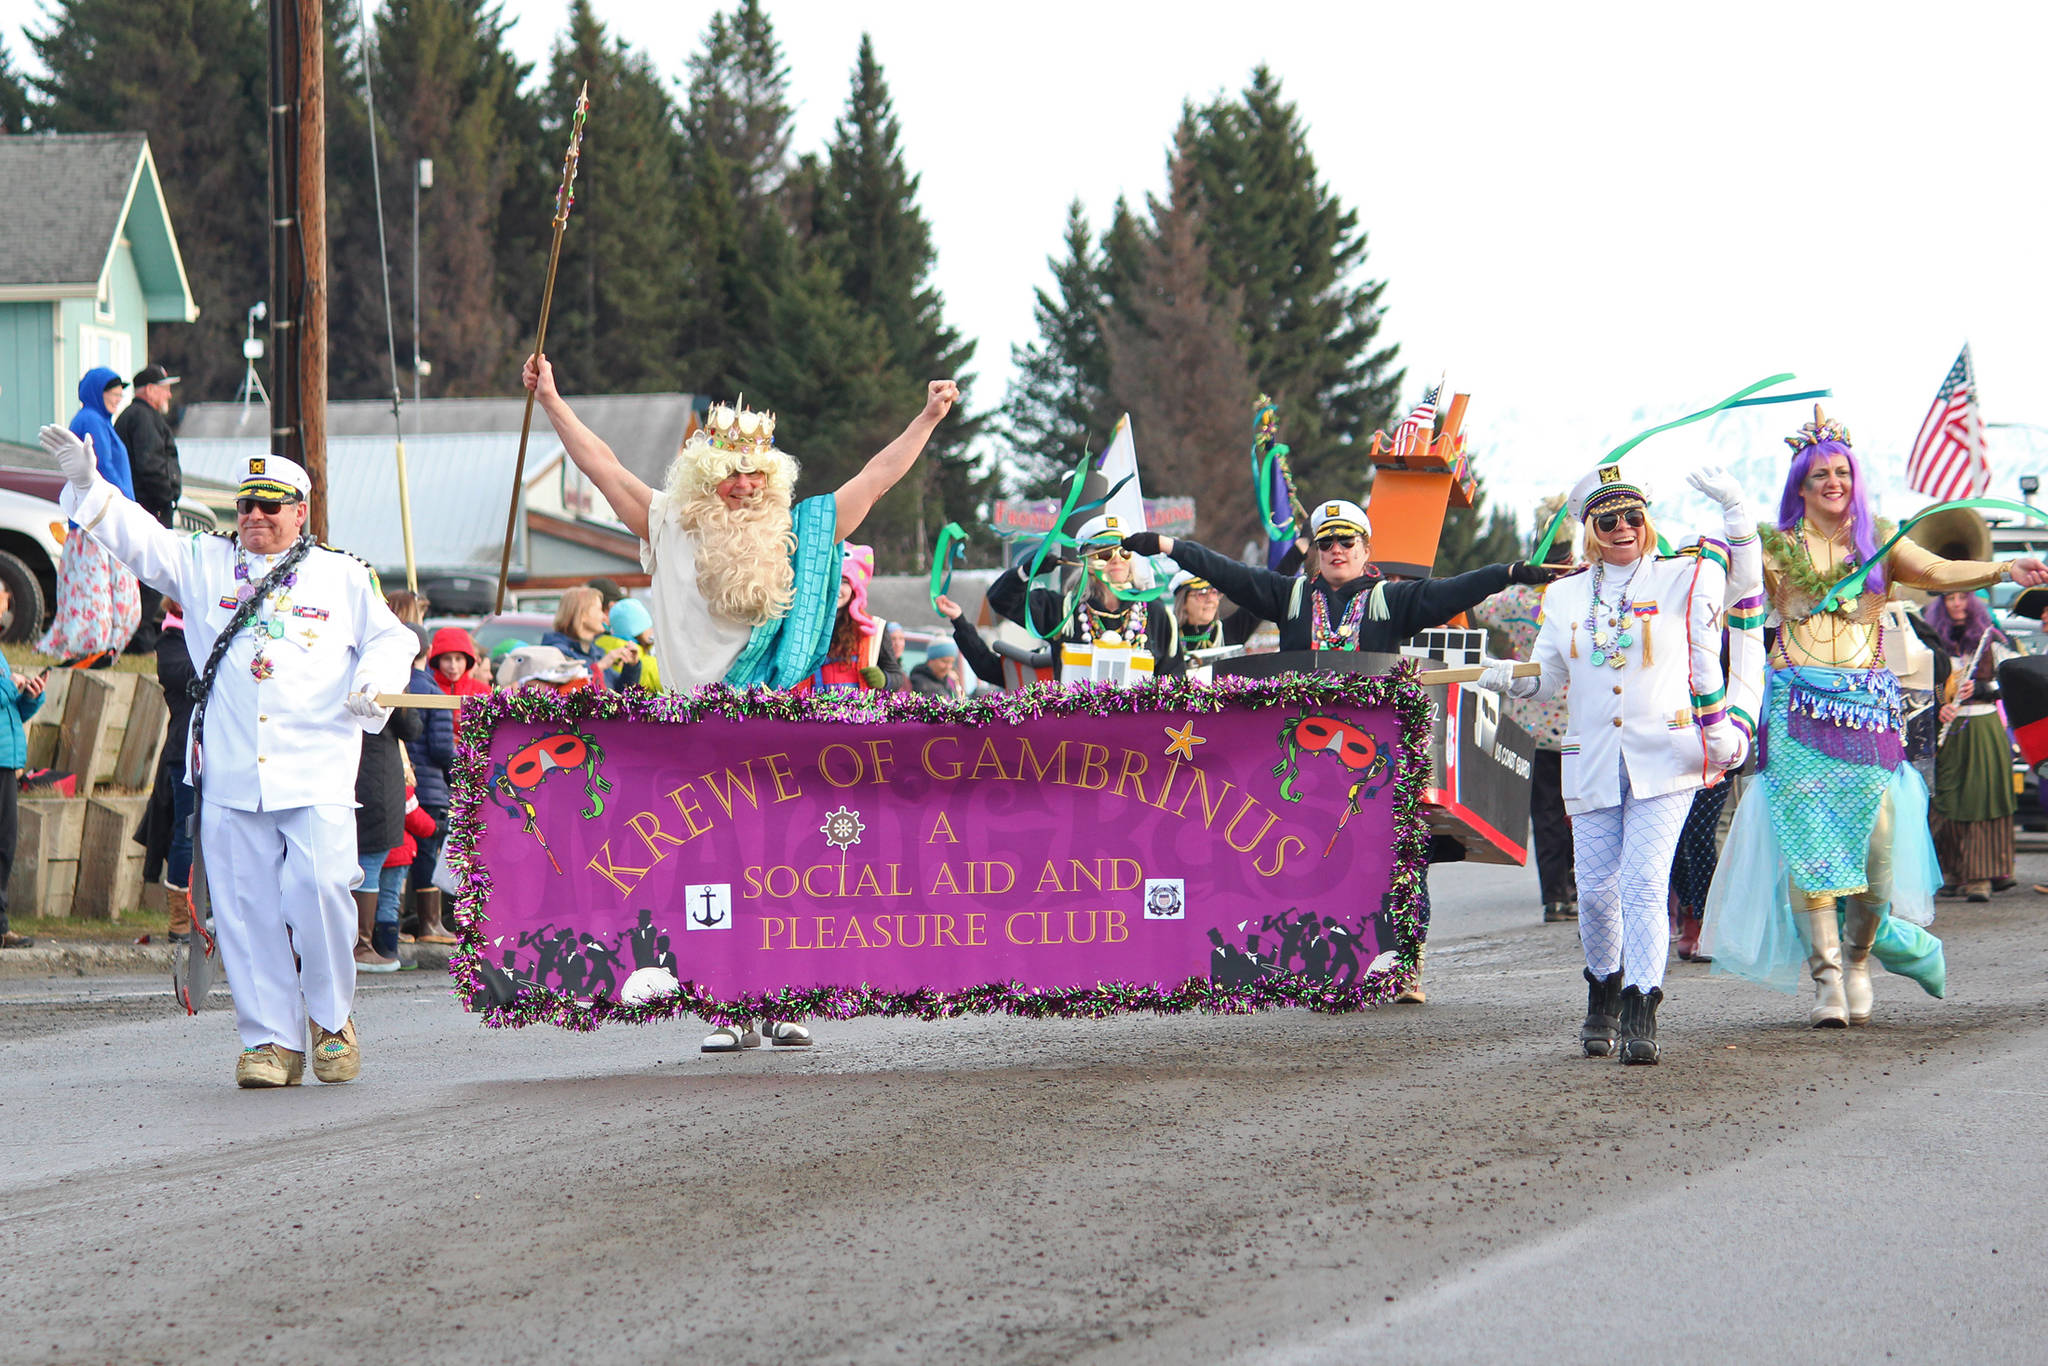 Members of the Krewe of Gambrinus march down Pioneer Avenue on Saturday, Feb. 9, 2019 during the Winter Carnival Parade in Homer, Alaska. (Photo by Megan Pacer/Homer News)